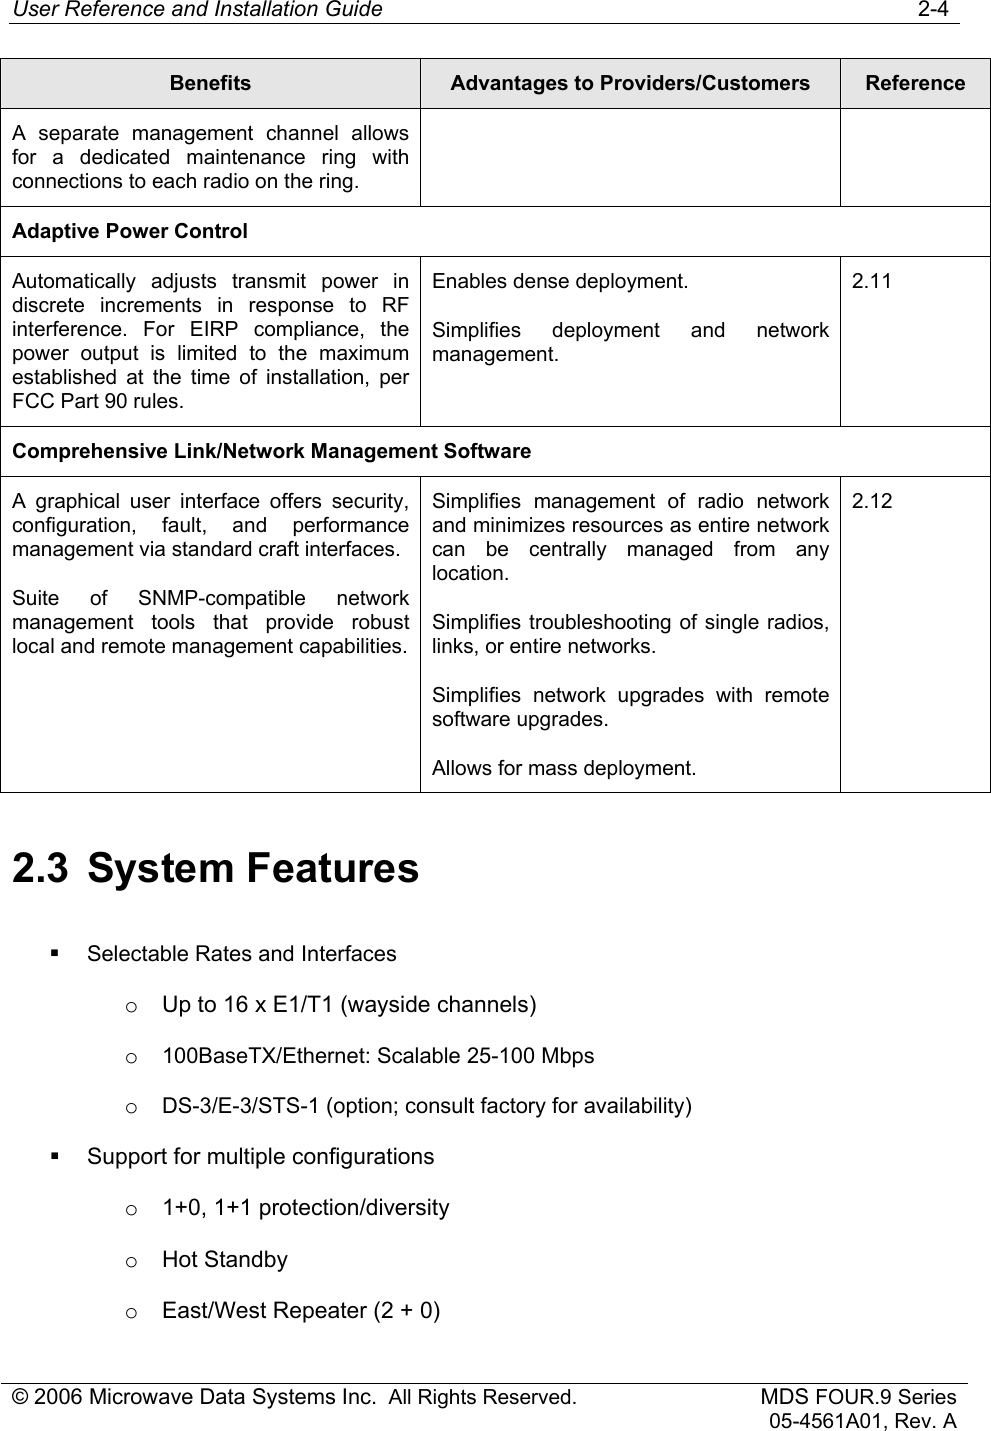 User Reference and Installation Guide   2-4 © 2006 Microwave Data Systems Inc.  All Rights Reserved. MDS FOUR.9 Series 05-4561A01, Rev. A Benefits  Advantages to Providers/Customers  Reference A separate management channel allows for a dedicated maintenance ring with connections to each radio on the ring. Adaptive Power Control Automatically adjusts transmit power in discrete increments in response to RF interference. For EIRP compliance, the power output is limited to the maximum established at the time of installation, per FCC Part 90 rules. Enables dense deployment. Simplifies deployment and network management. 2.11 Comprehensive Link/Network Management Software A graphical user interface offers security, configuration, fault, and performance management via standard craft interfaces. Suite of SNMP-compatible network management tools that provide robust local and remote management capabilities. Simplifies management of radio network and minimizes resources as entire network can be centrally managed from any location. Simplifies troubleshooting of single radios, links, or entire networks. Simplifies network upgrades with remote software upgrades. Allows for mass deployment. 2.12 2.3 System Features  Selectable Rates and Interfaces o  Up to 16 x E1/T1 (wayside channels) o 100BaseTX/Ethernet: Scalable 25-100 Mbps o DS-3/E-3/STS-1 (option; consult factory for availability)   Support for multiple configurations o  1+0, 1+1 protection/diversity o Hot Standby o  East/West Repeater (2 + 0) 